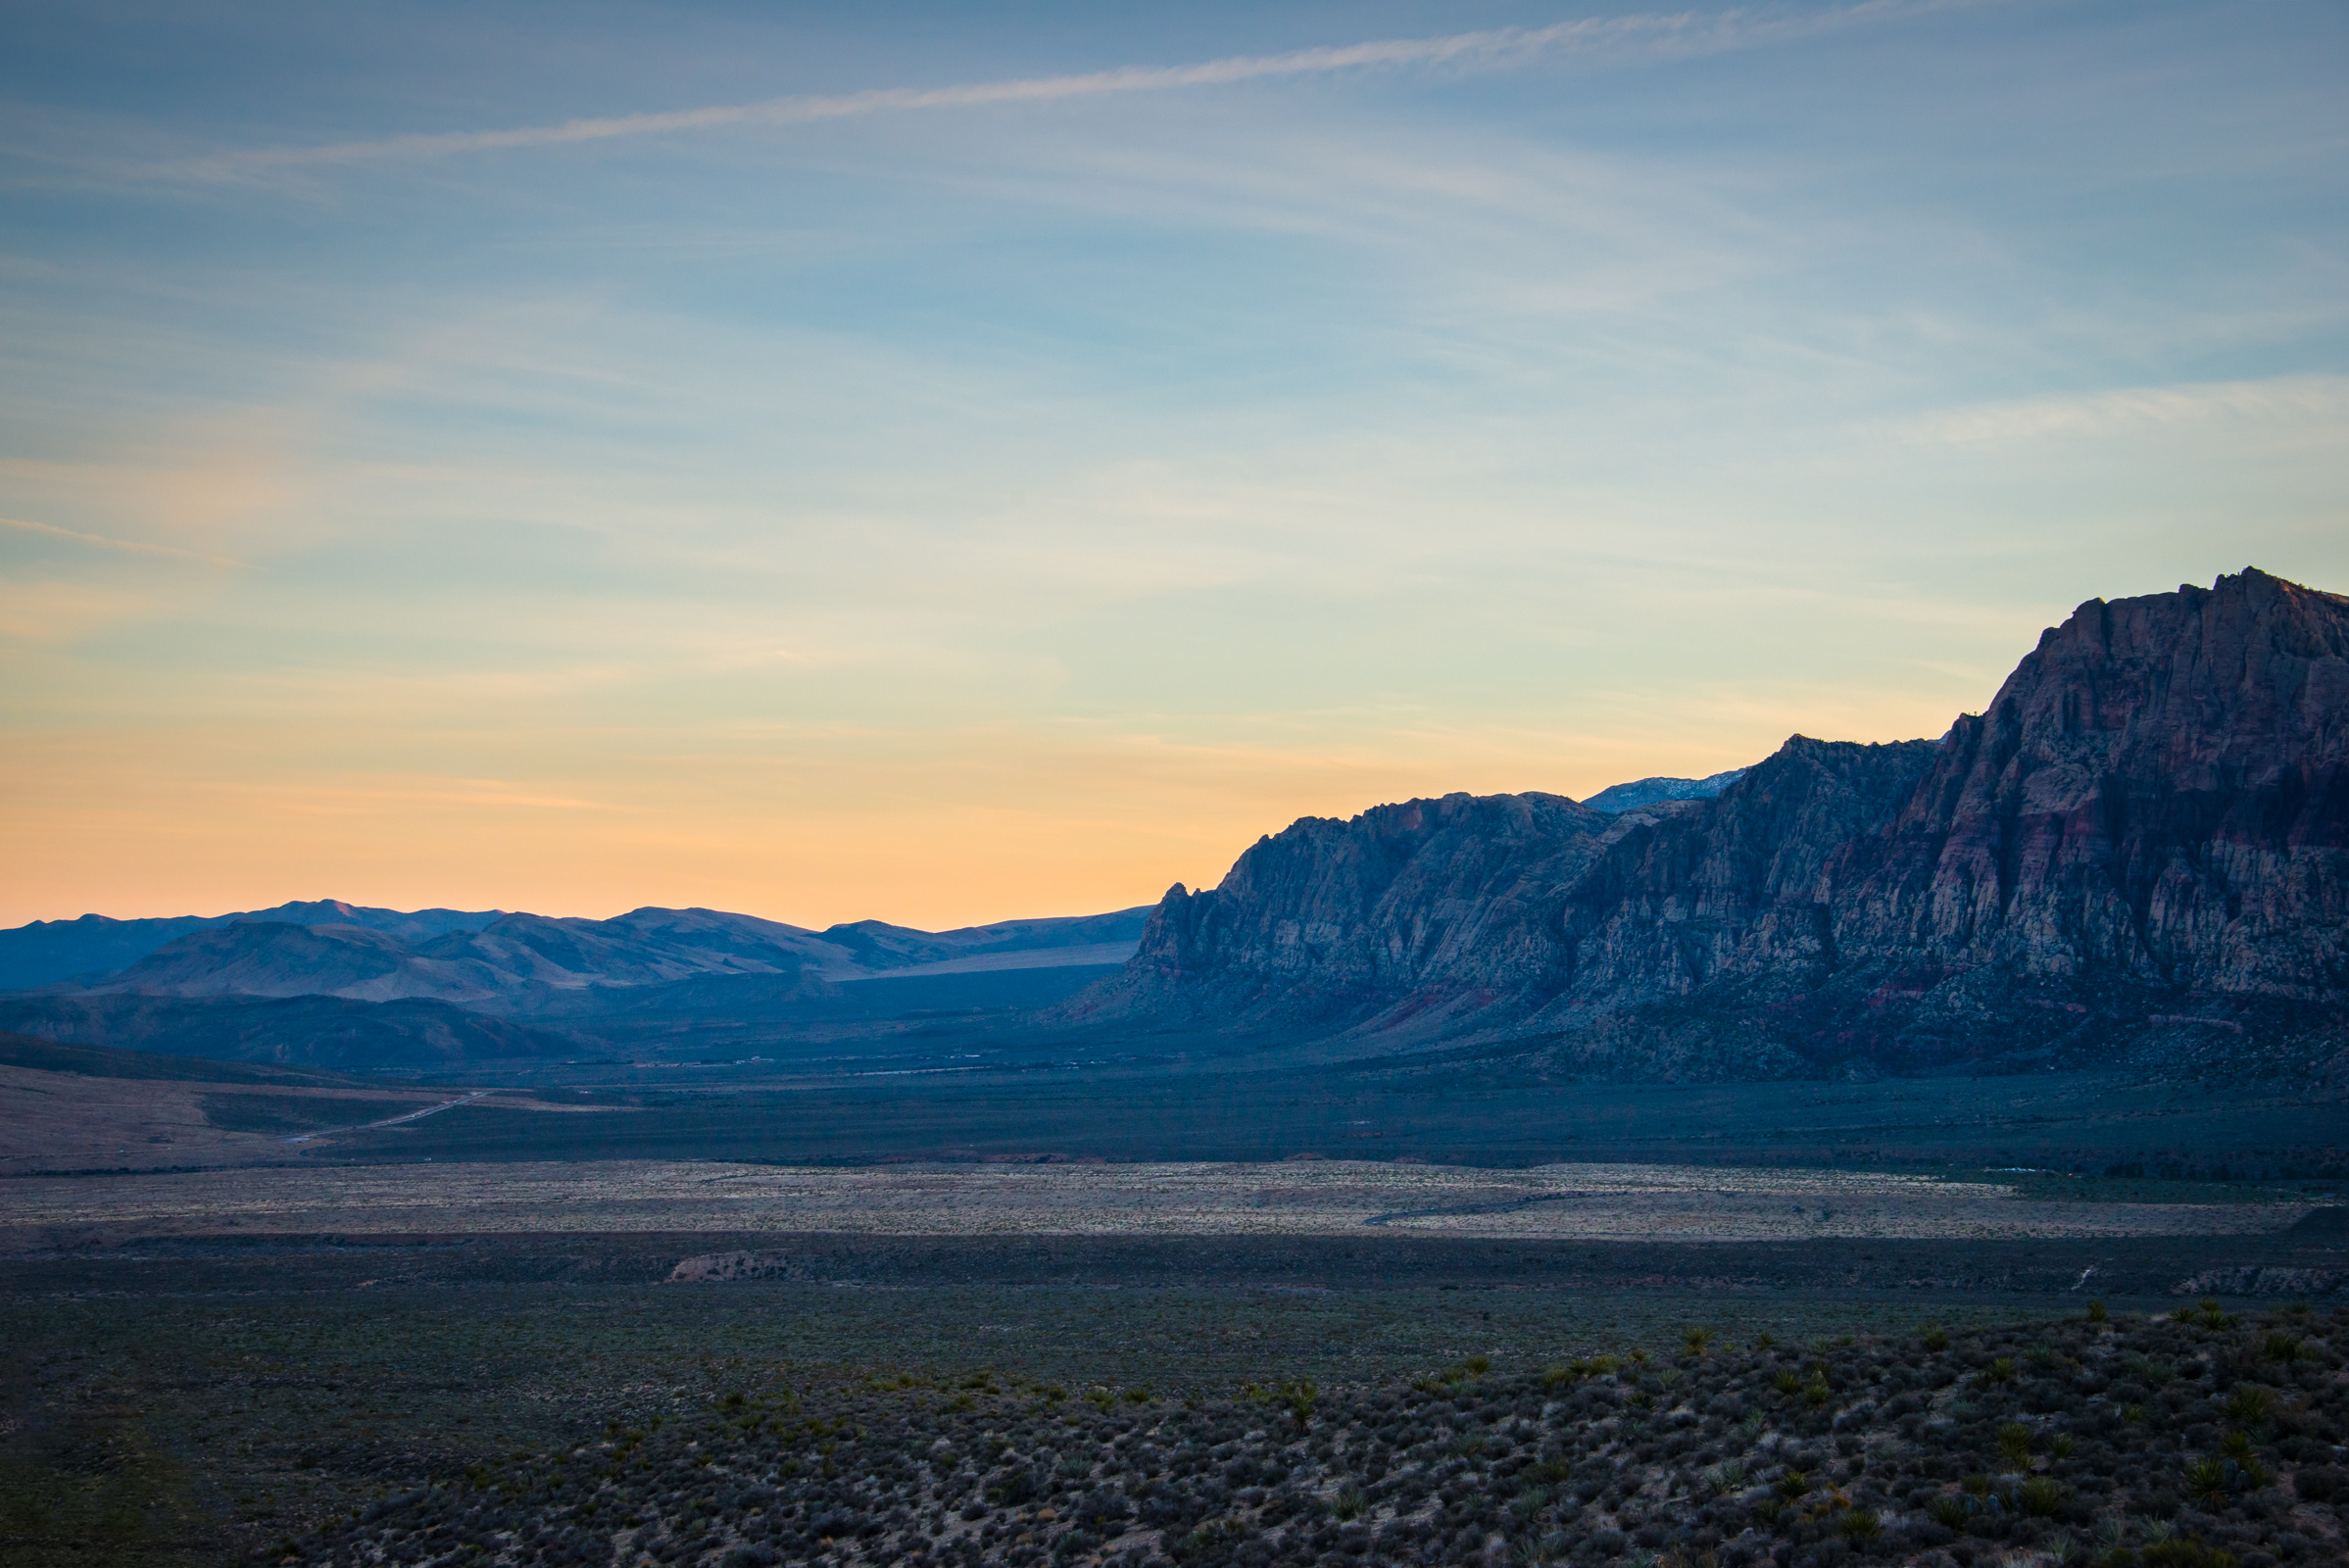 sunset at red rock canyon, nevada, photographed by jamie bannon photography.